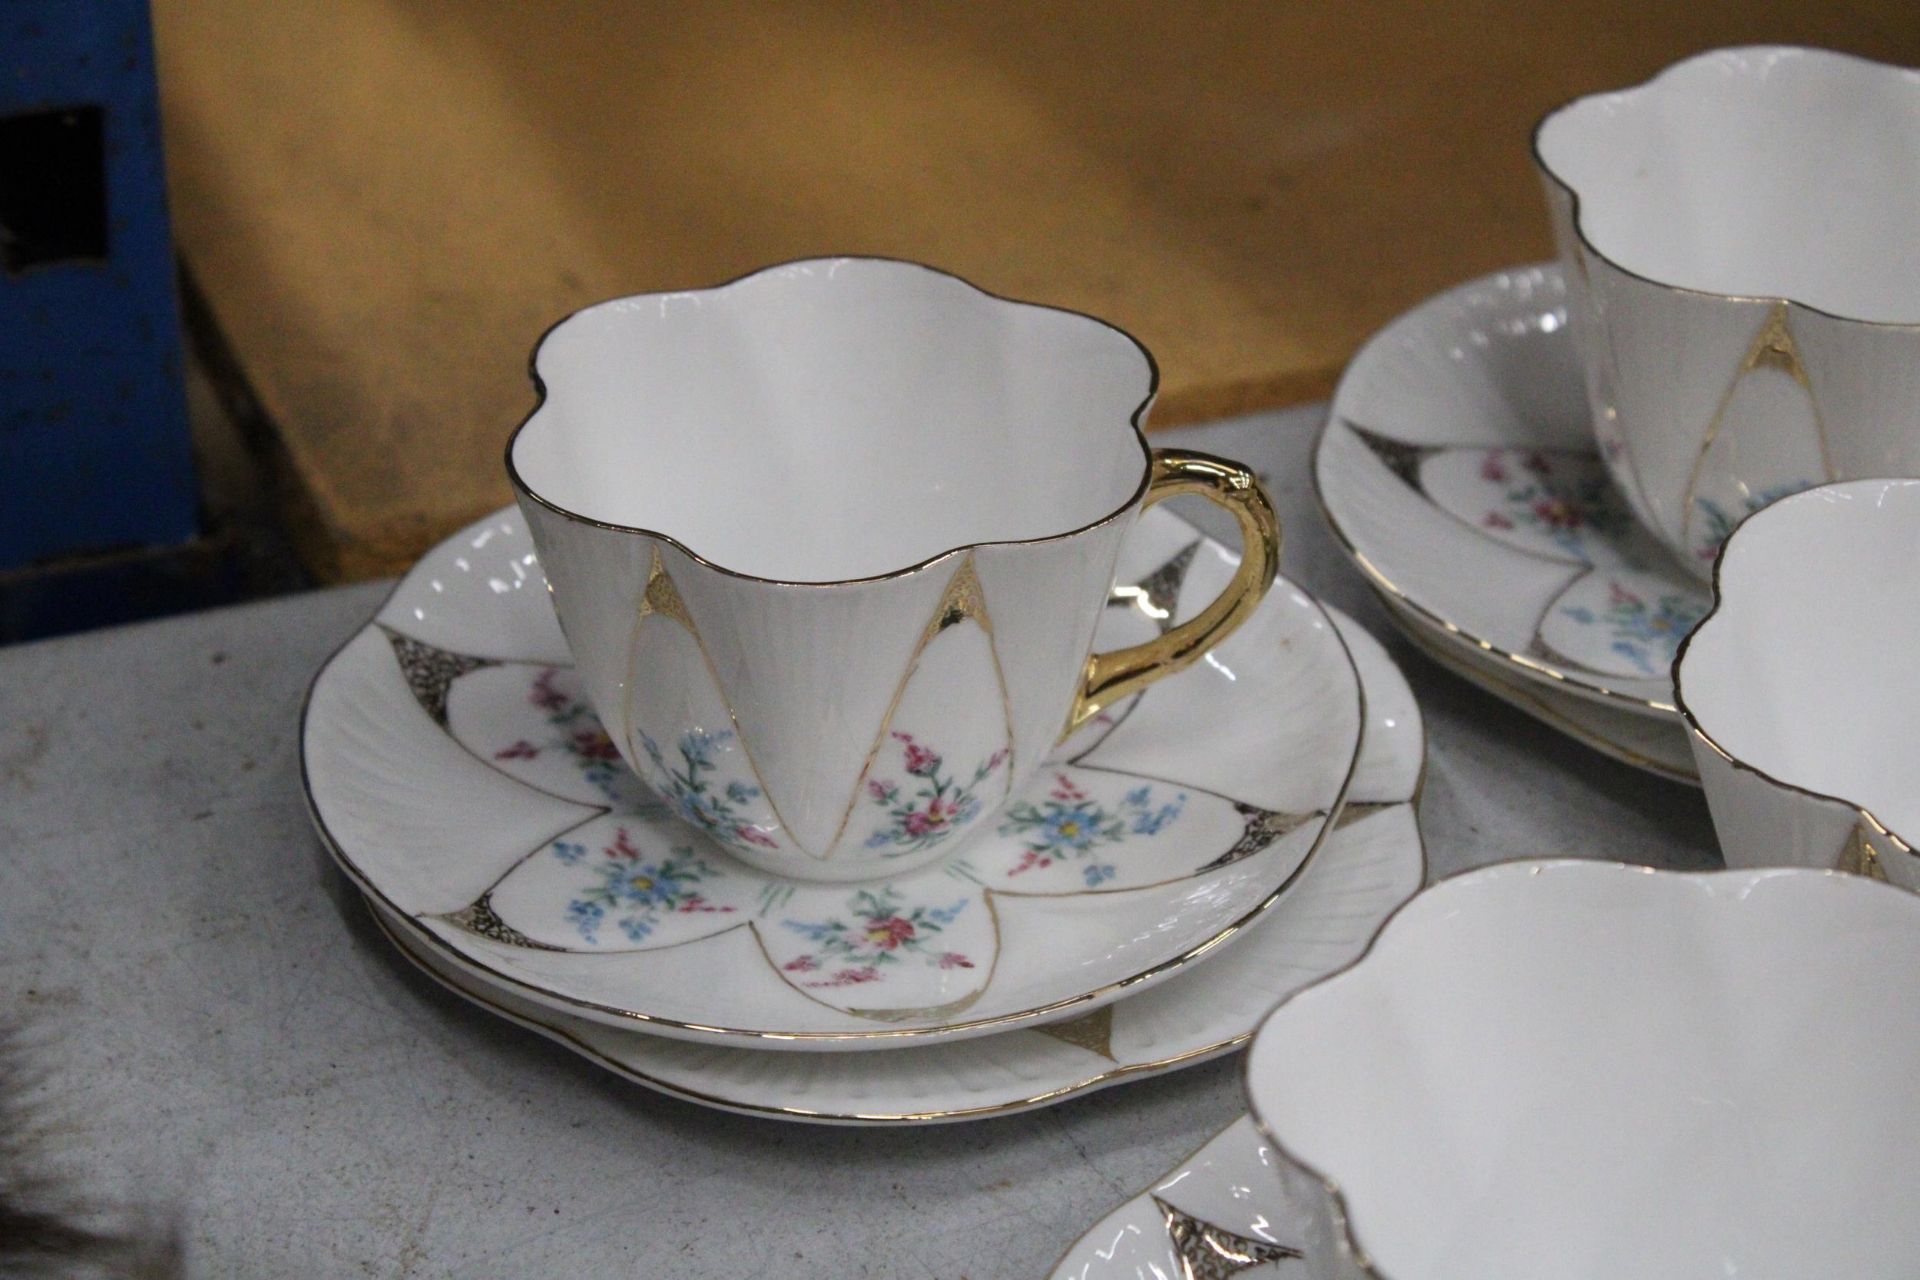 A VINTAGE SHELLEY HANDPAINTED DAINTY SHAPE TEACUPS AND SAUCERS TO INCLUDE SUGAR, CREAMER, CAKE/BREAD - Image 5 of 6